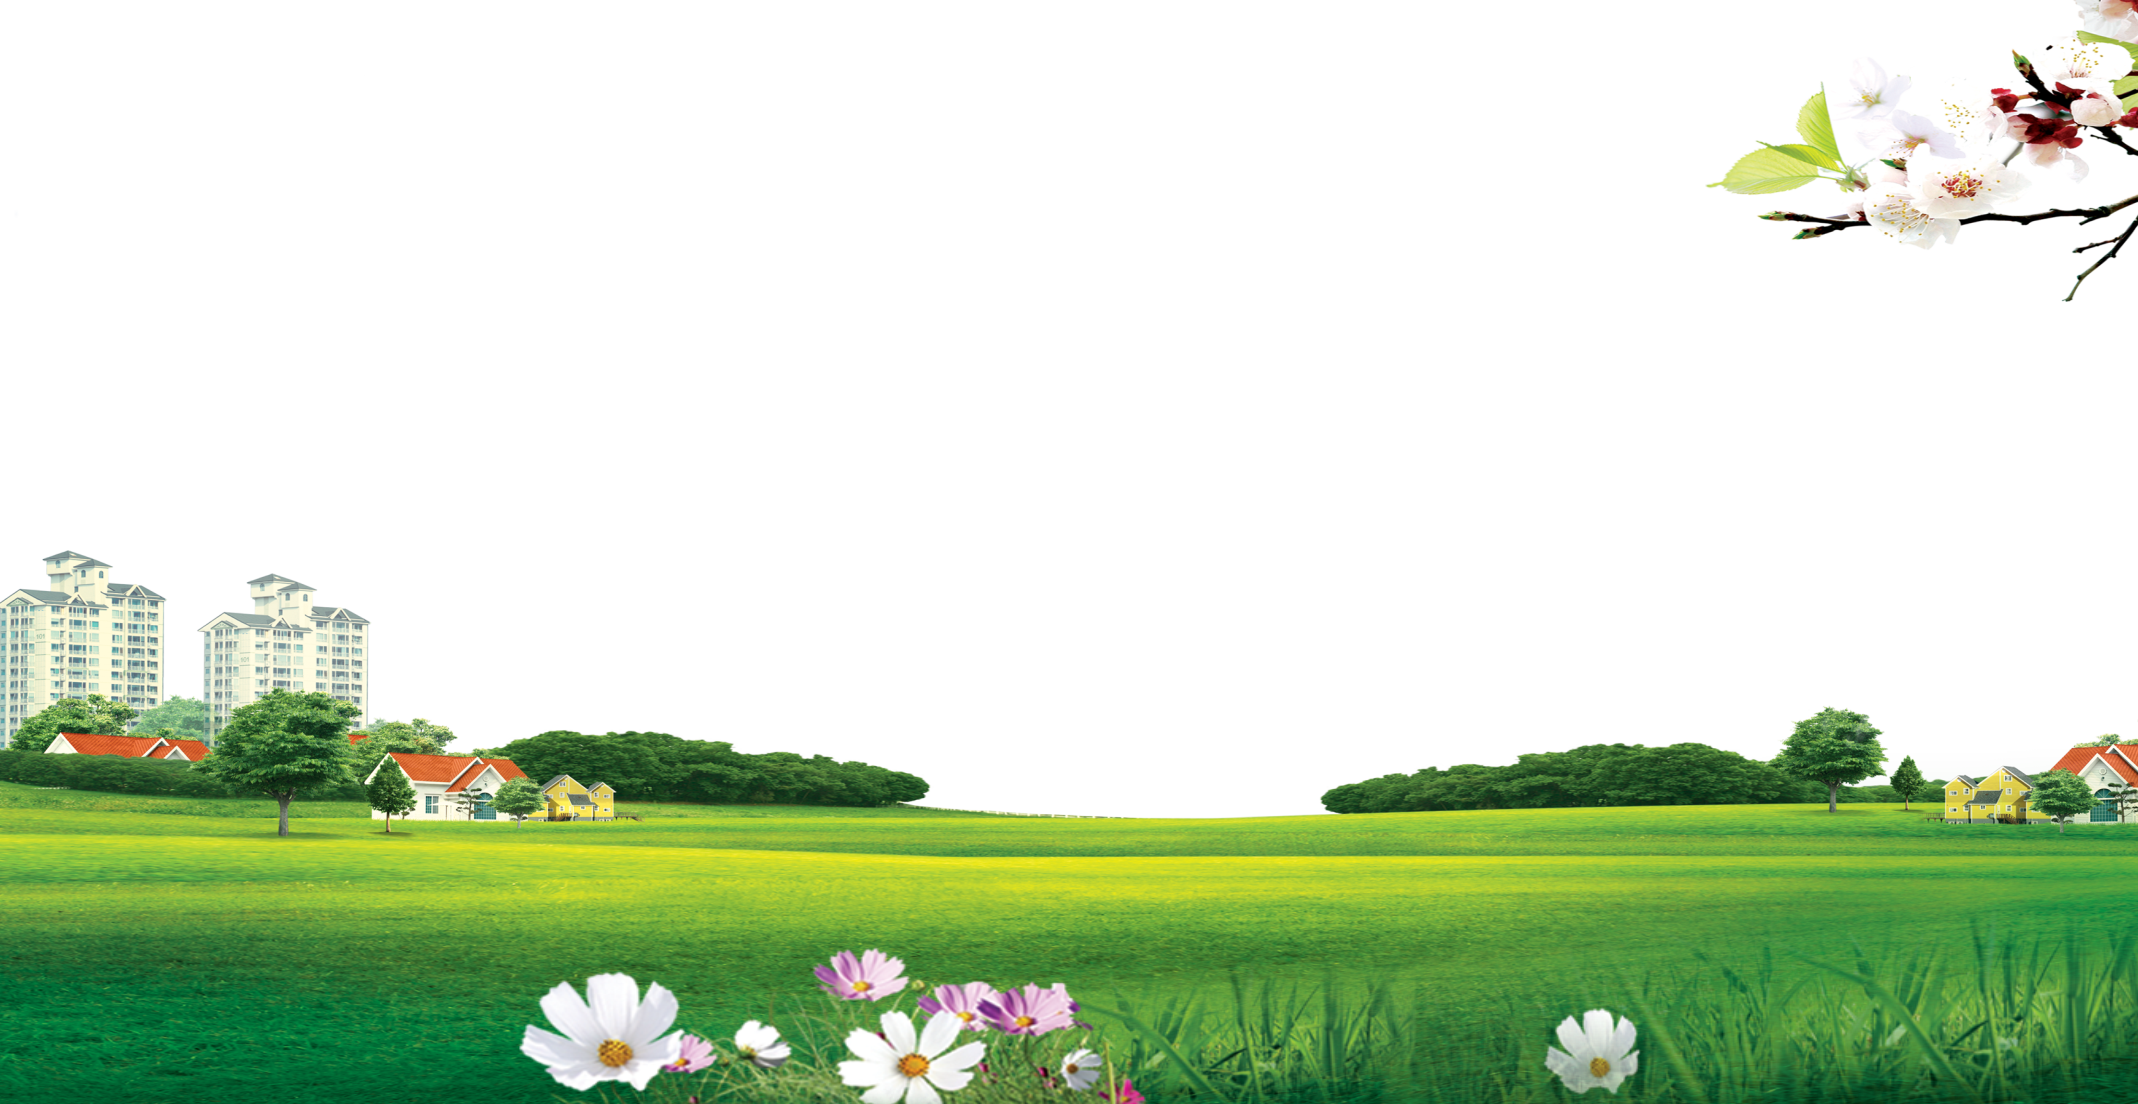 Meadow Free Download Image PNG Image